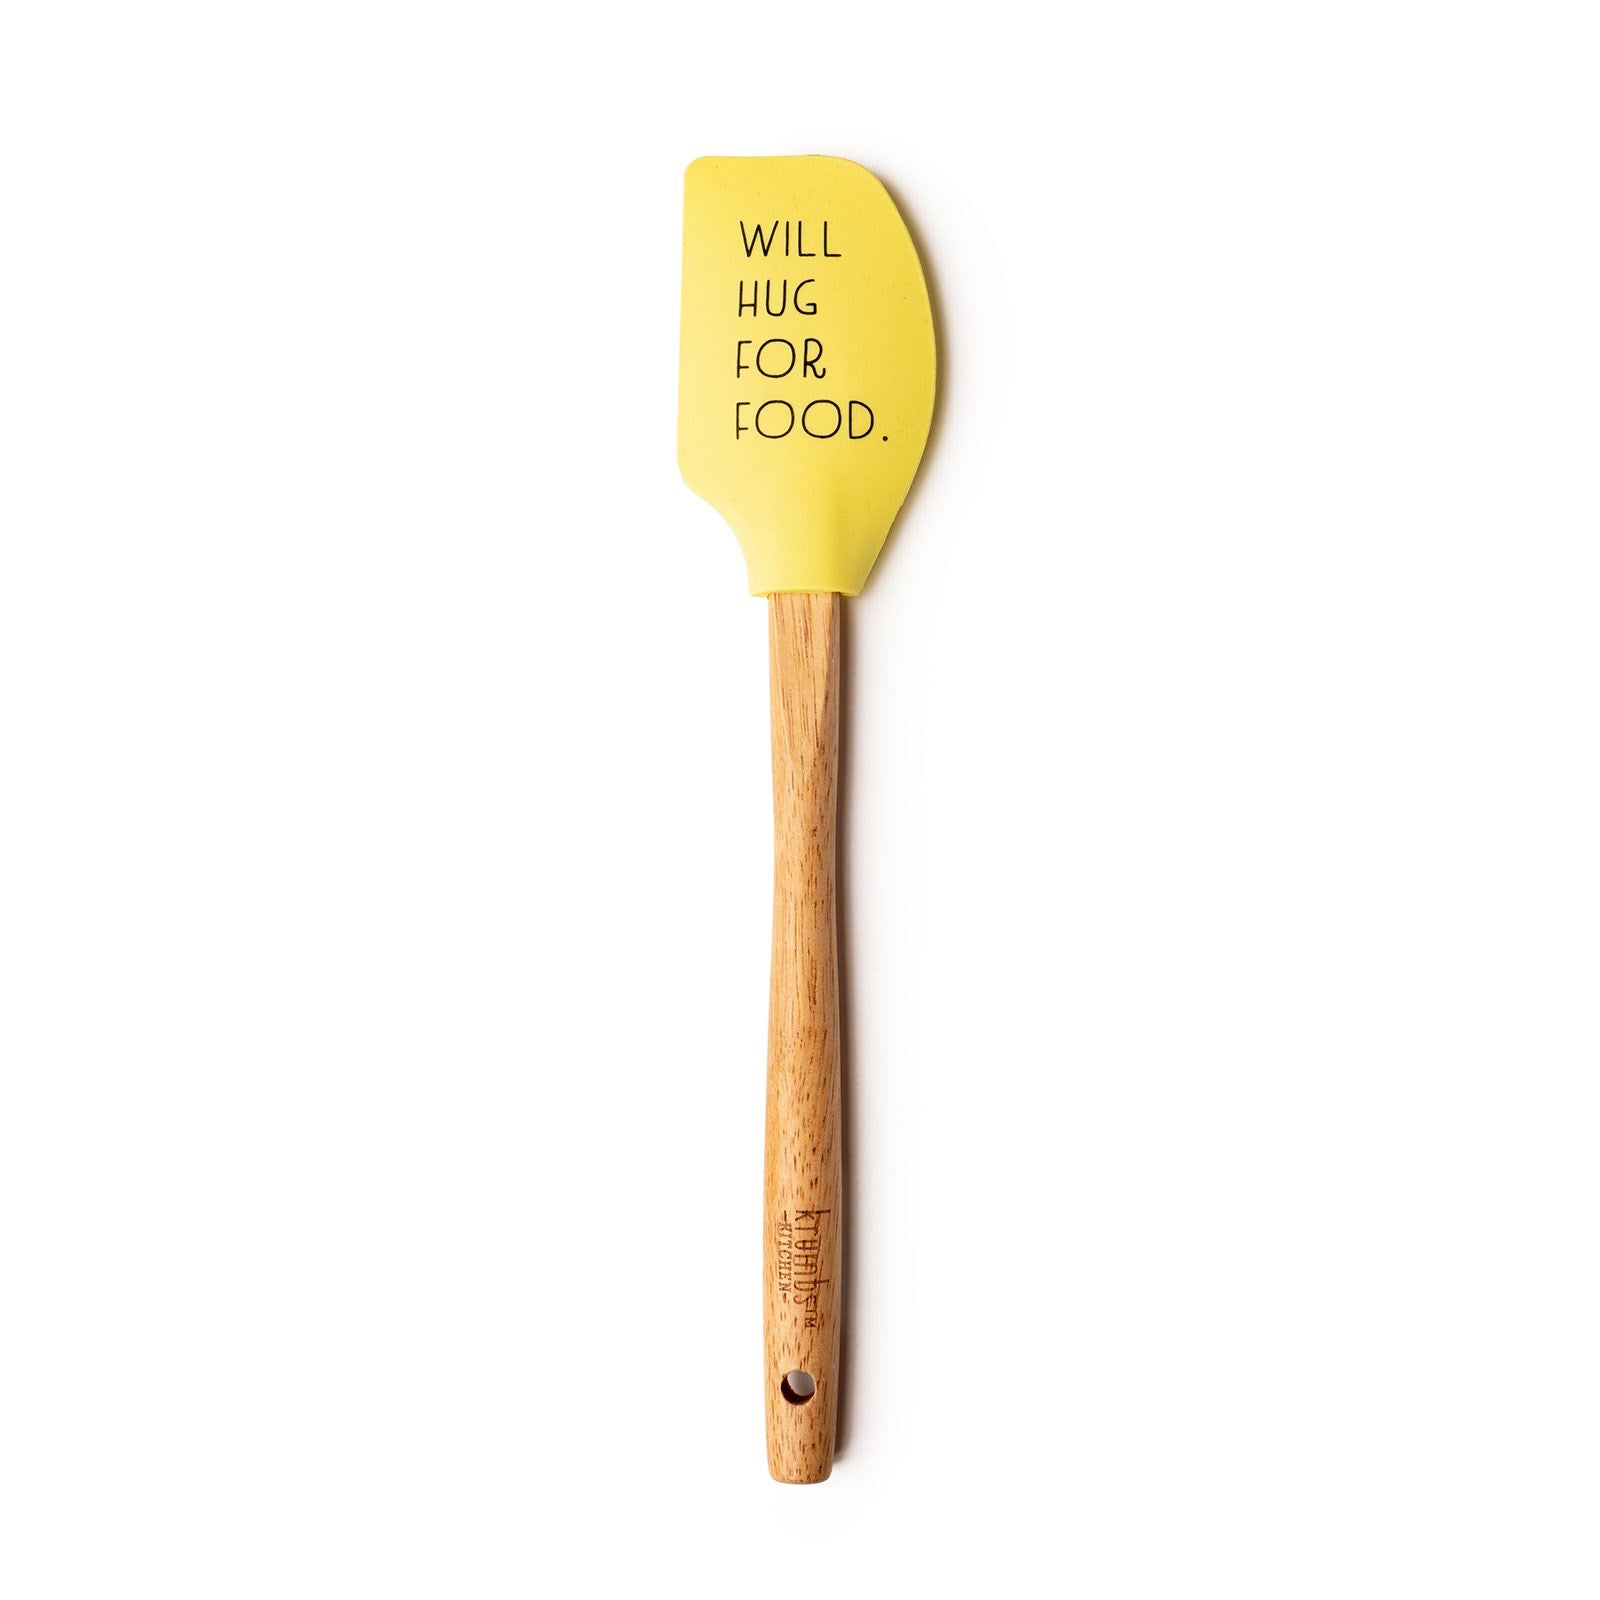 yellow spatula with "will hug for food" printed on it and a wooden handle.